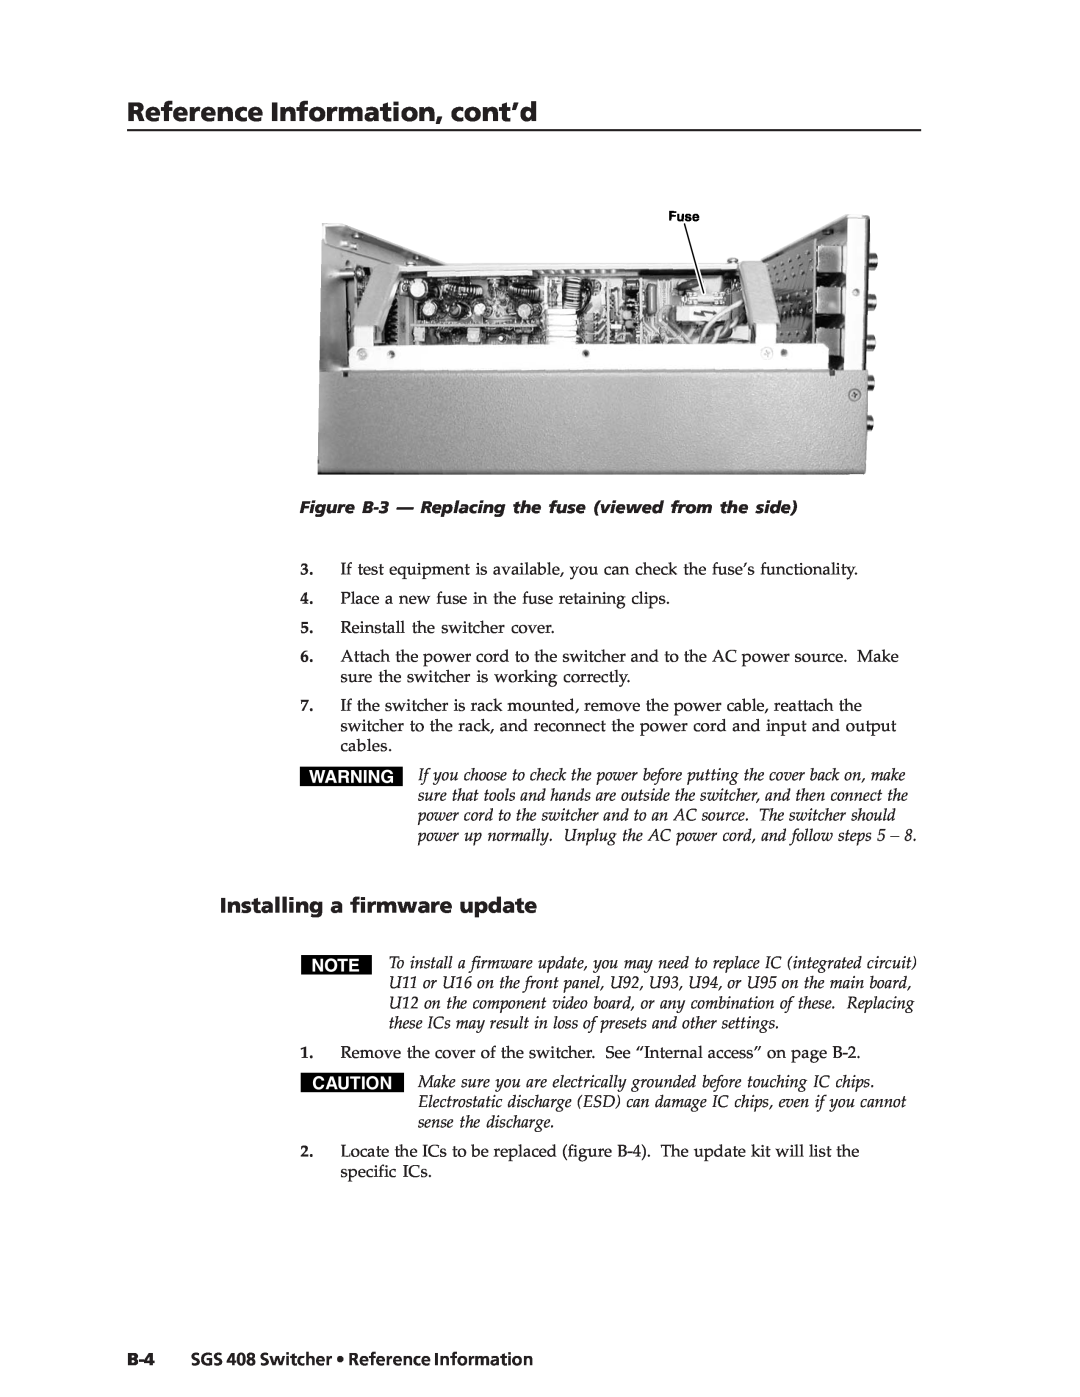 Extron electronic SGS 408 manual Reference Information, cont’d, Installing a firmware update 